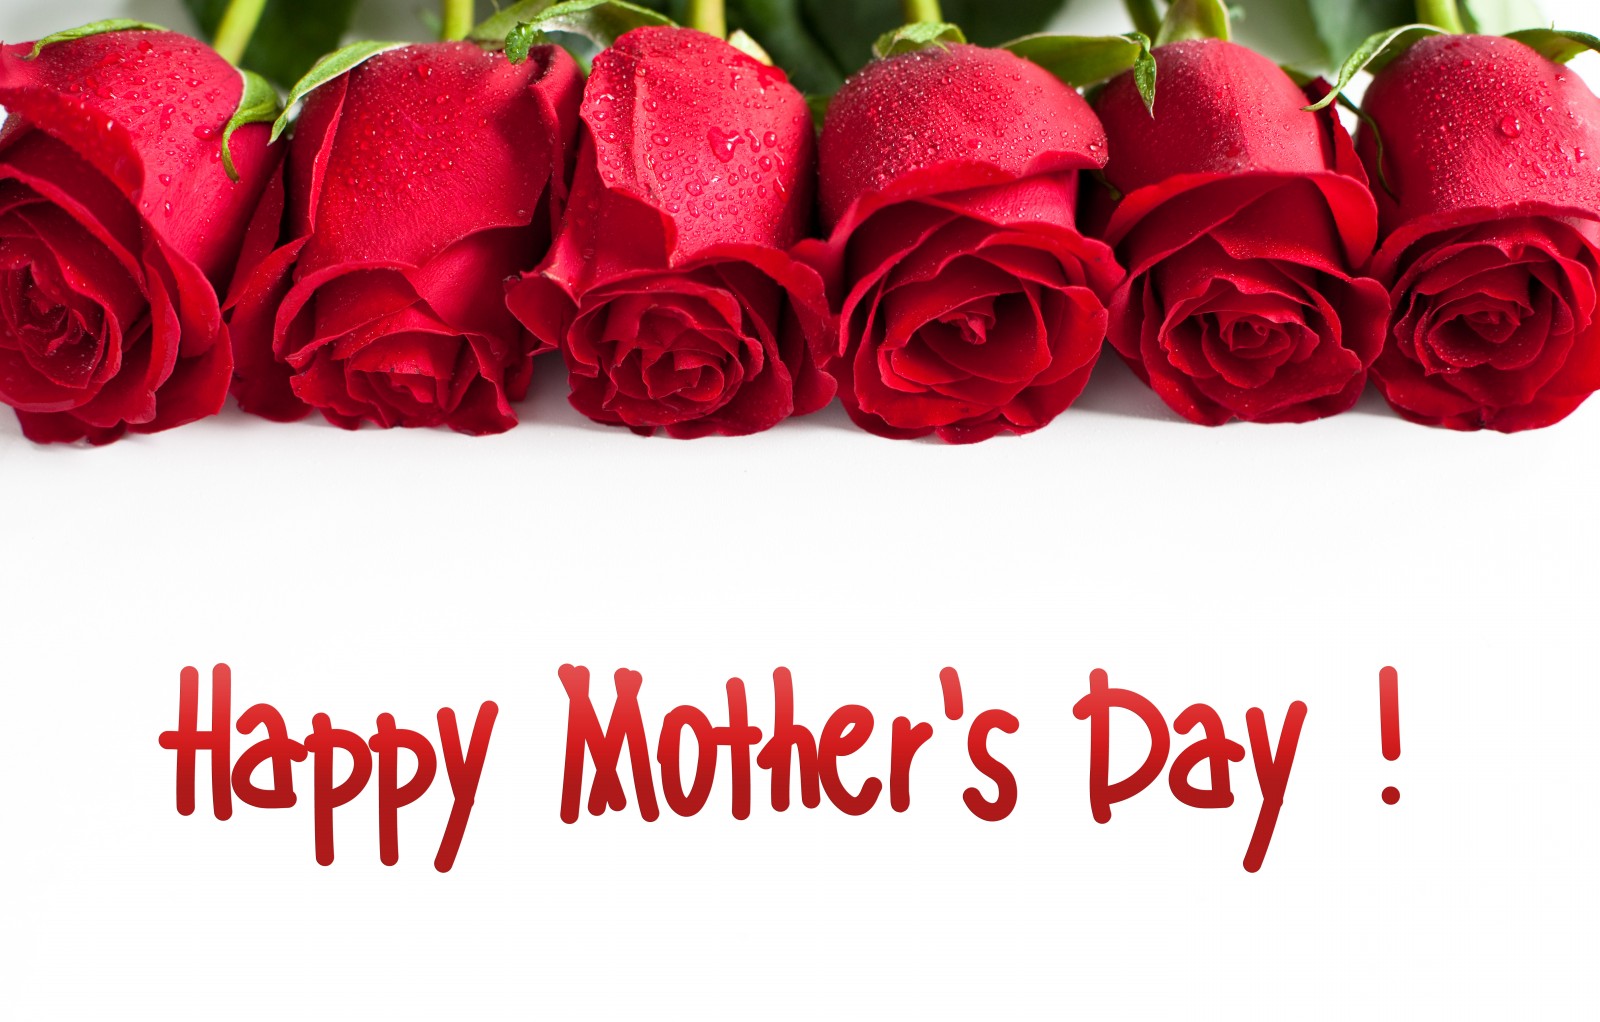 Happy Mothers Day 2016 Wishes Messages Whatsapp Status Dp Pictures Sms